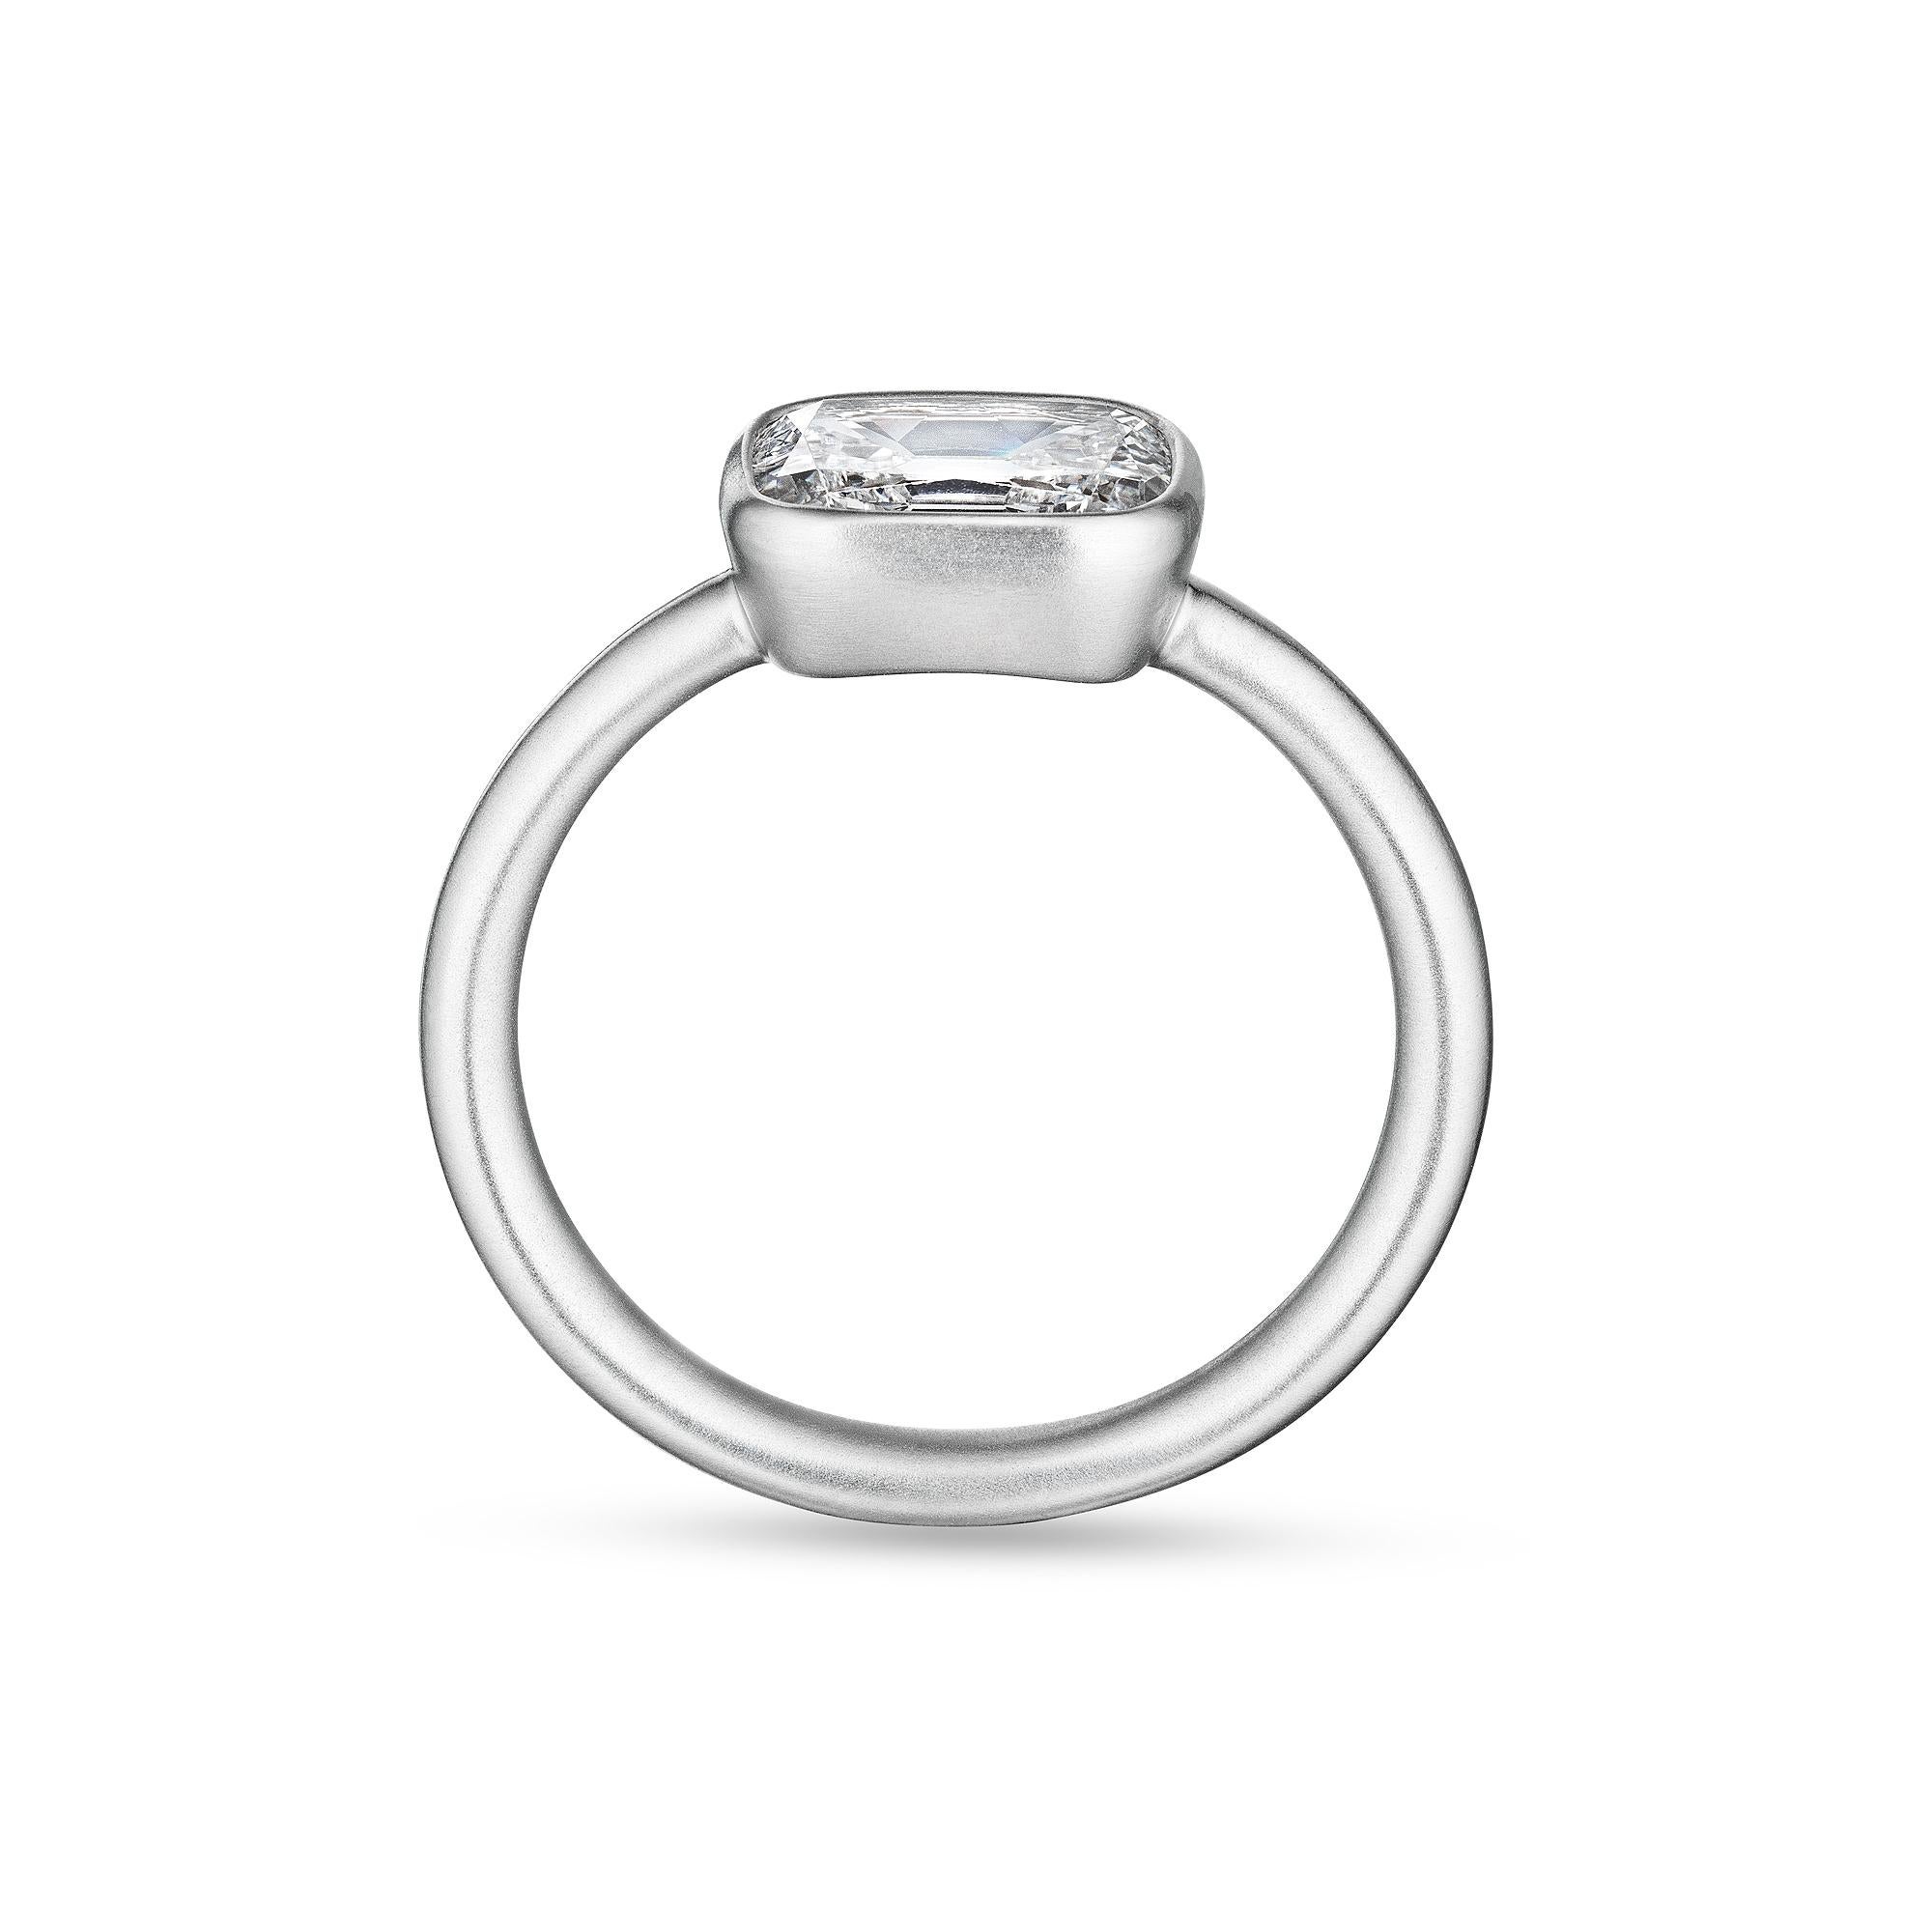 Refreshingly sleek, modern yet classic, this 1.18 carat cushion brilliant diamond platinum bezel set ring is immense in its simplicity.  Diamond is D color.  VS2 clarity.  GIA certification #6183256742.  Designed by Steven Fox Jewelry.  Size 6 US.